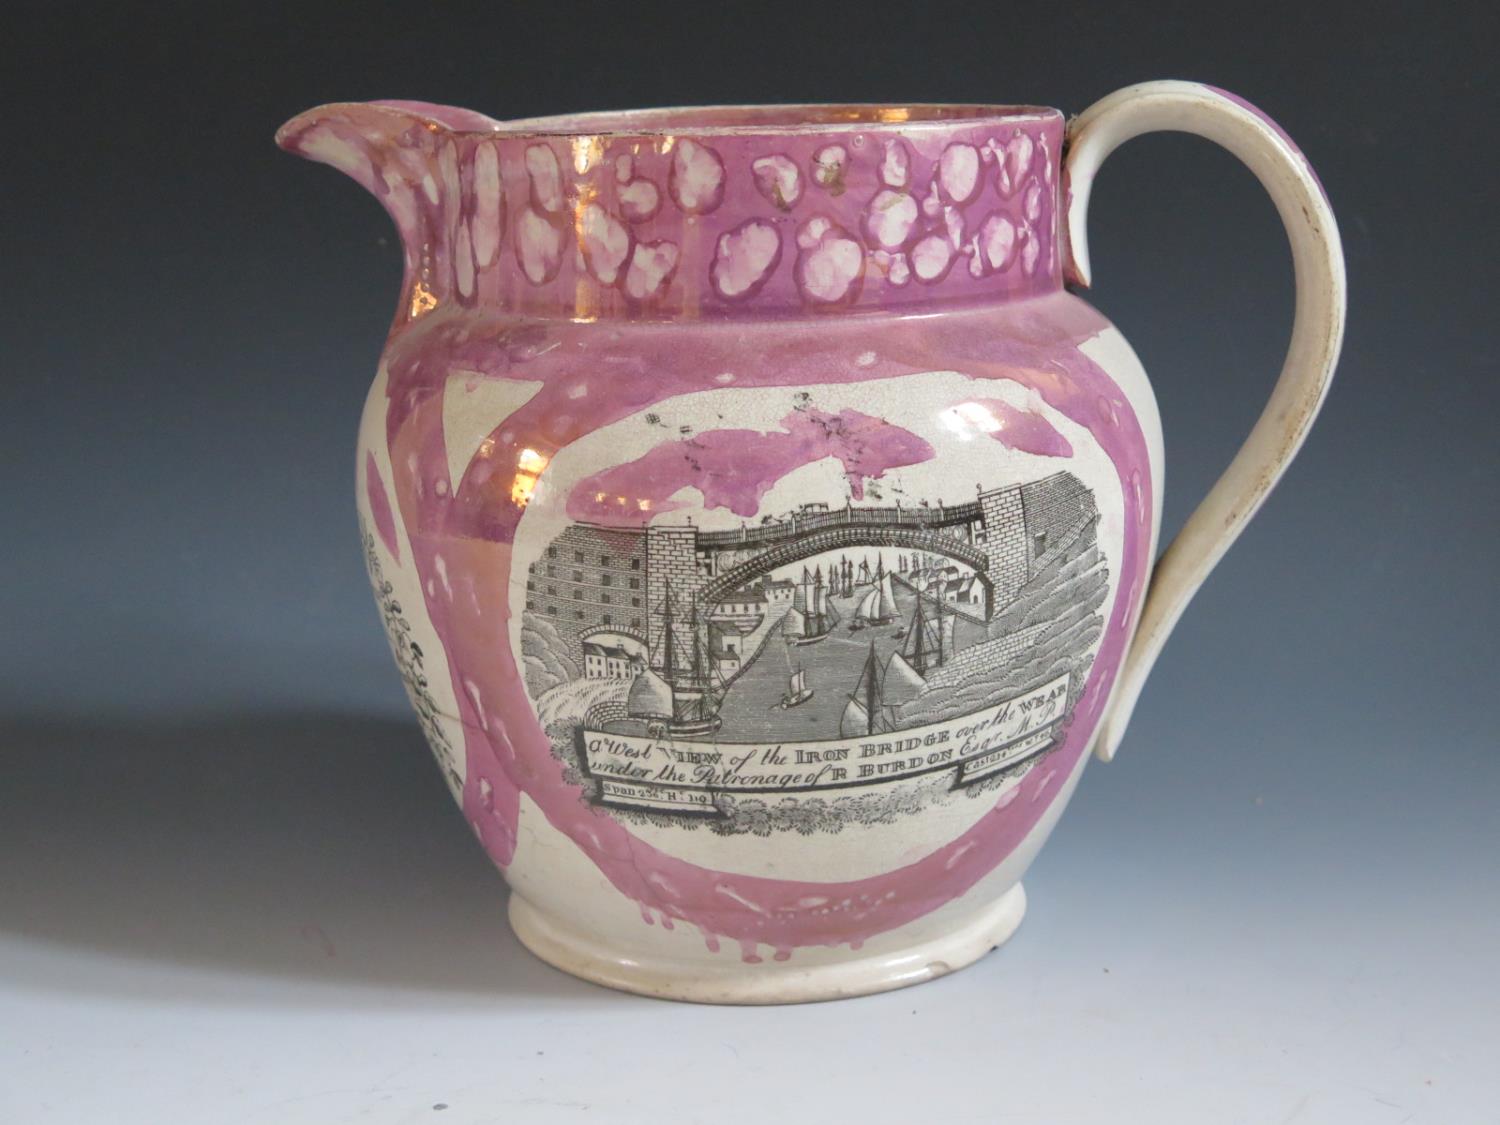 A Sunderland Lustre Jug decorated with monochrome transfers including Masonic scene with poetic - Image 3 of 6